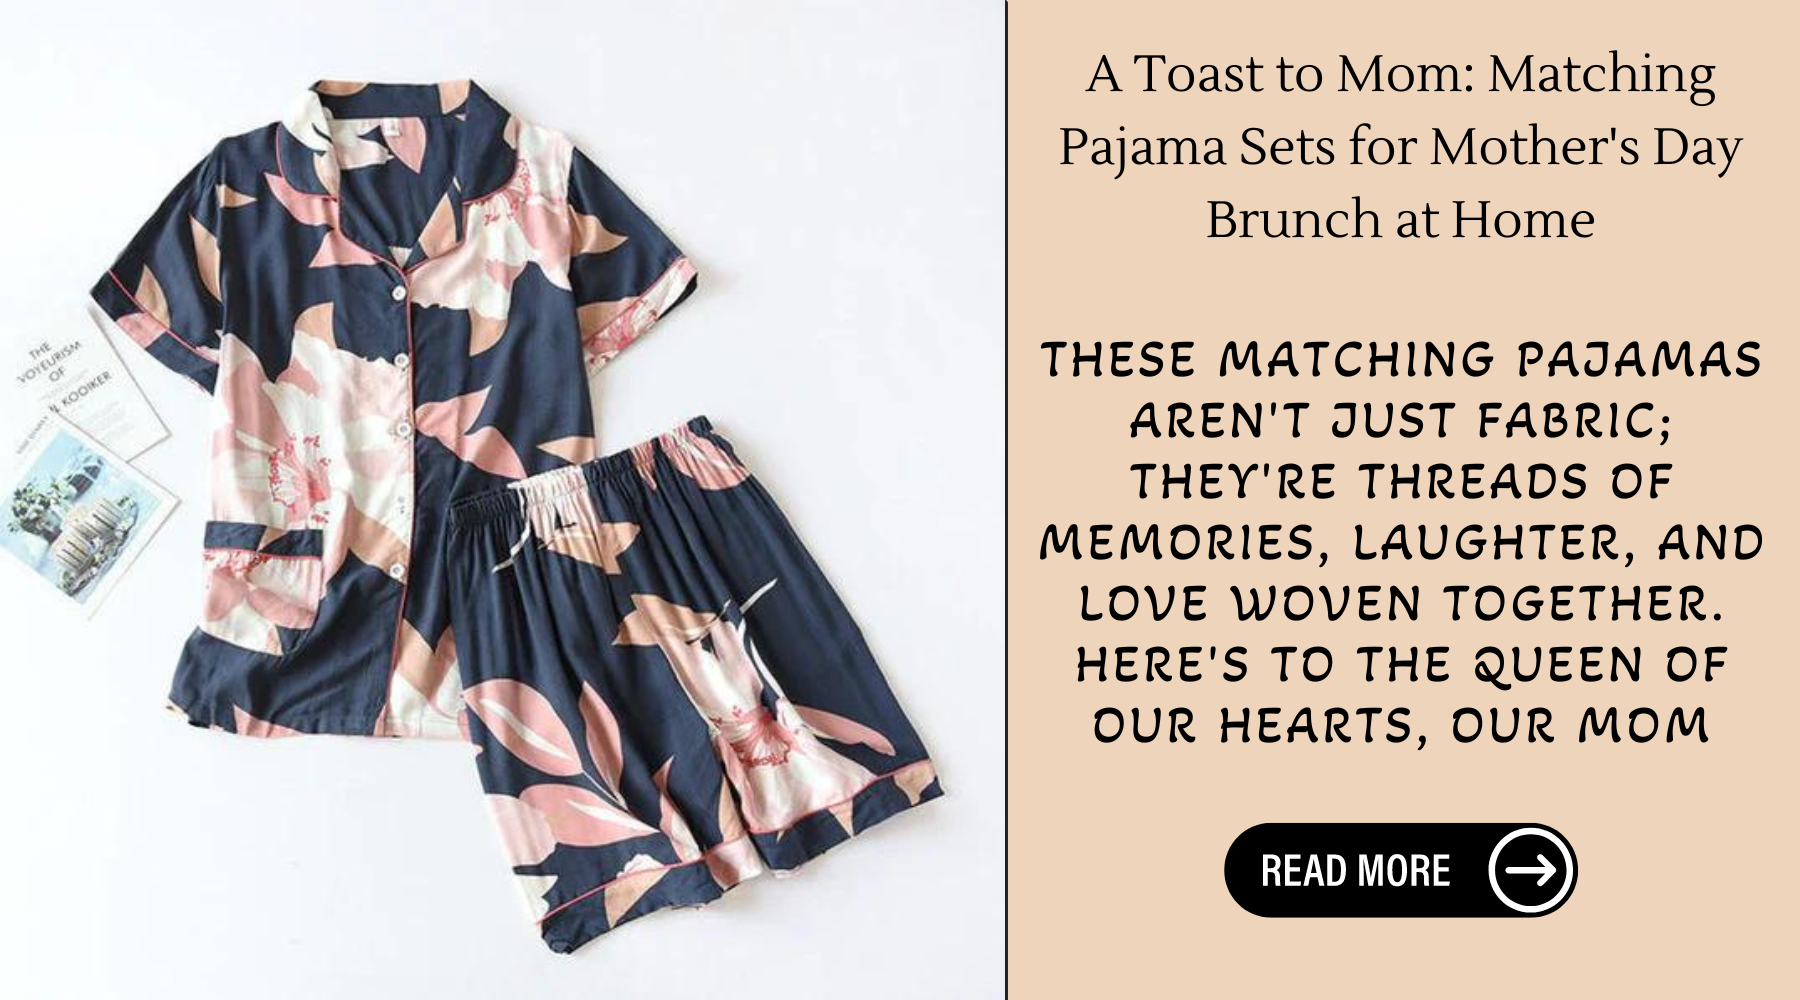 A Toast To Mom: Matching Pajama Sets For Mother's Day Brunch At Home